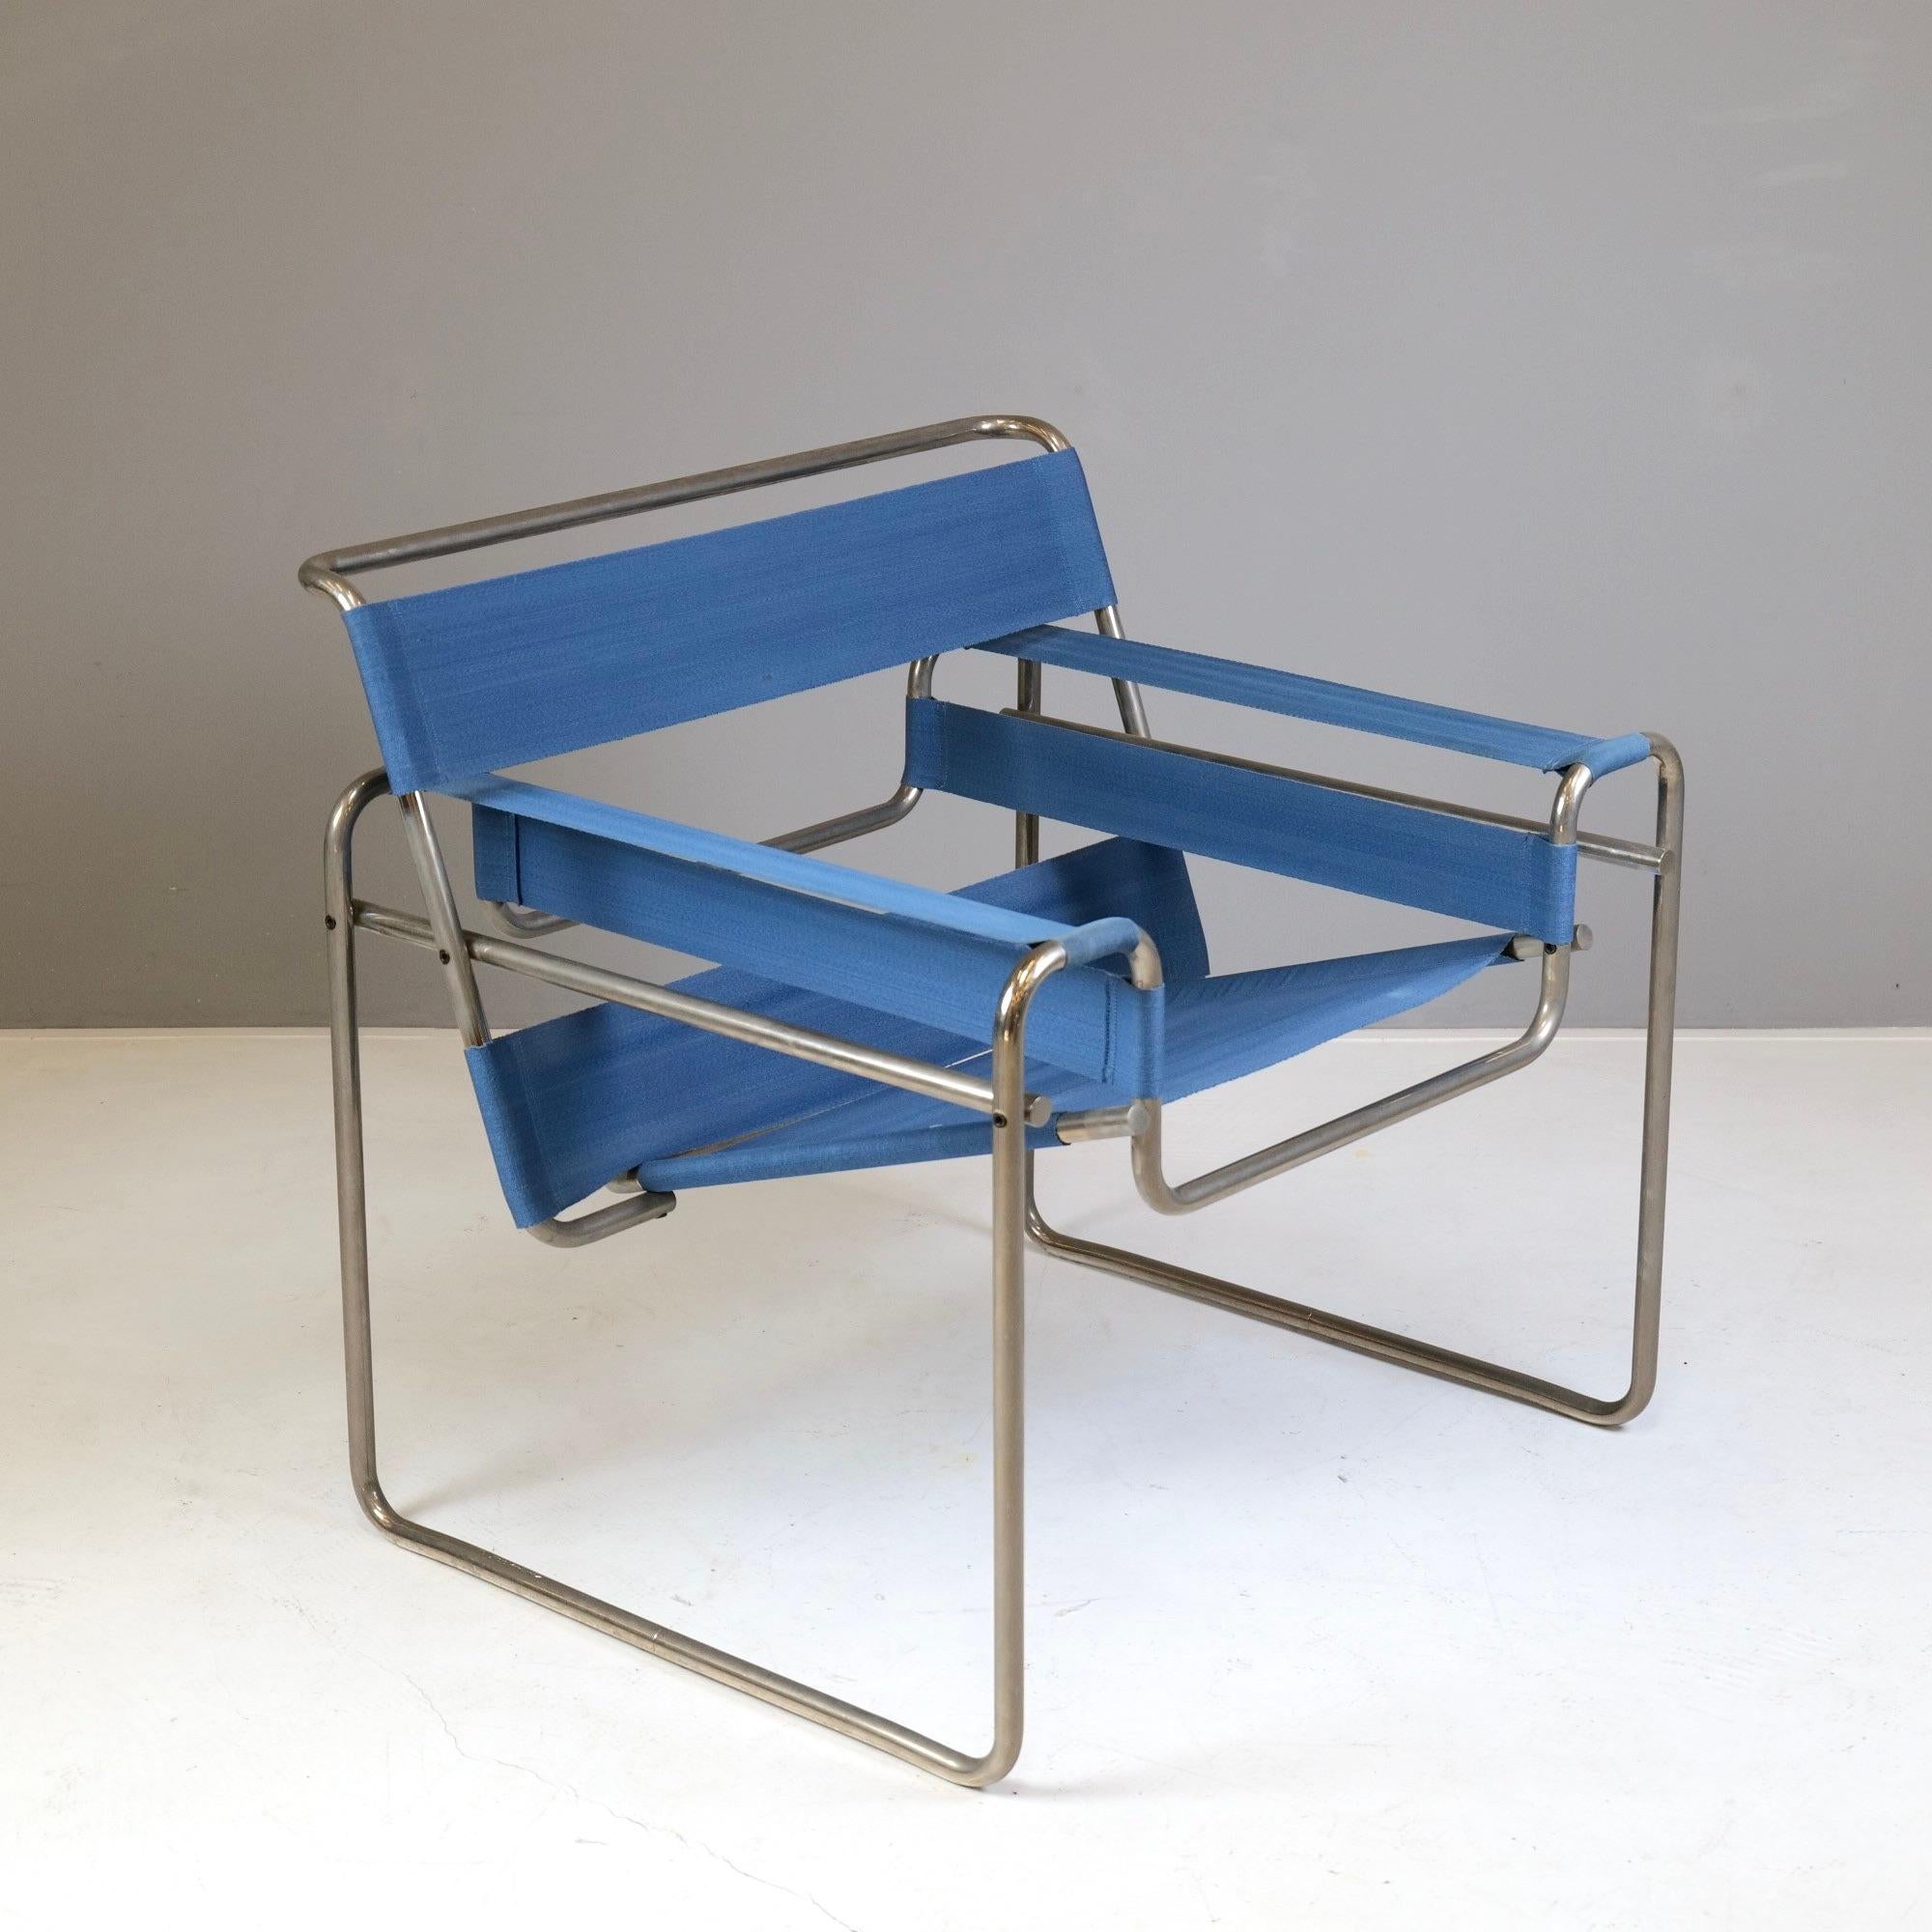 This rare blue Wassily chair with Eisengarn Canvas is a Knoll limited edition series where only 300 pieces were manufactured like the early pieces from the 1920 and 1930s.

Material:
Eisengarn blue canvas
tubular steel, nickel plated

Made in